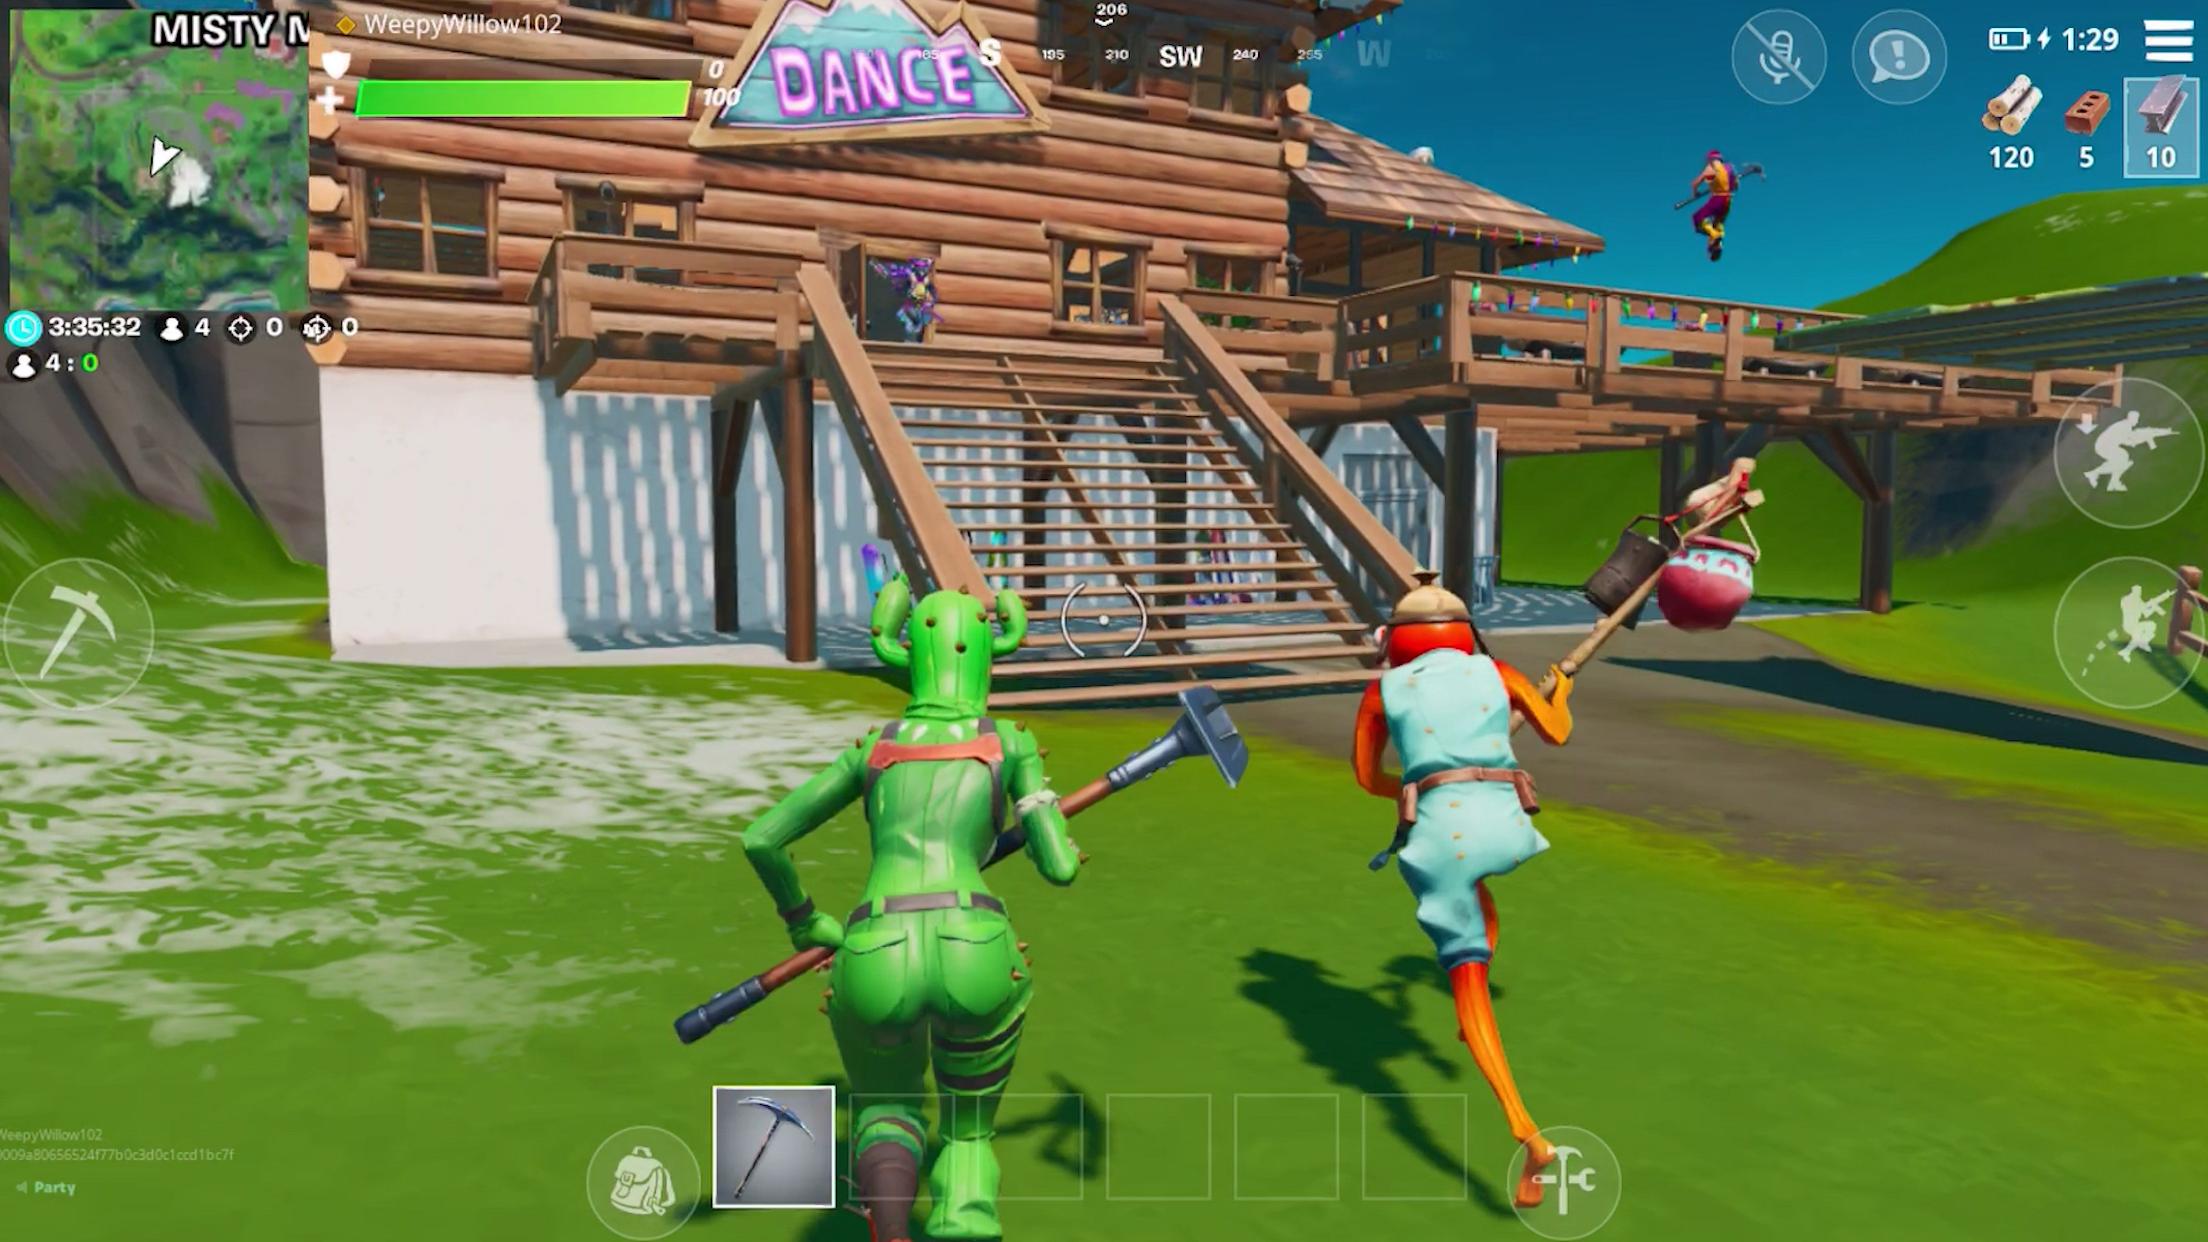 Fortnite for Android - APK Download - 2208 x 1242 jpeg 264kB